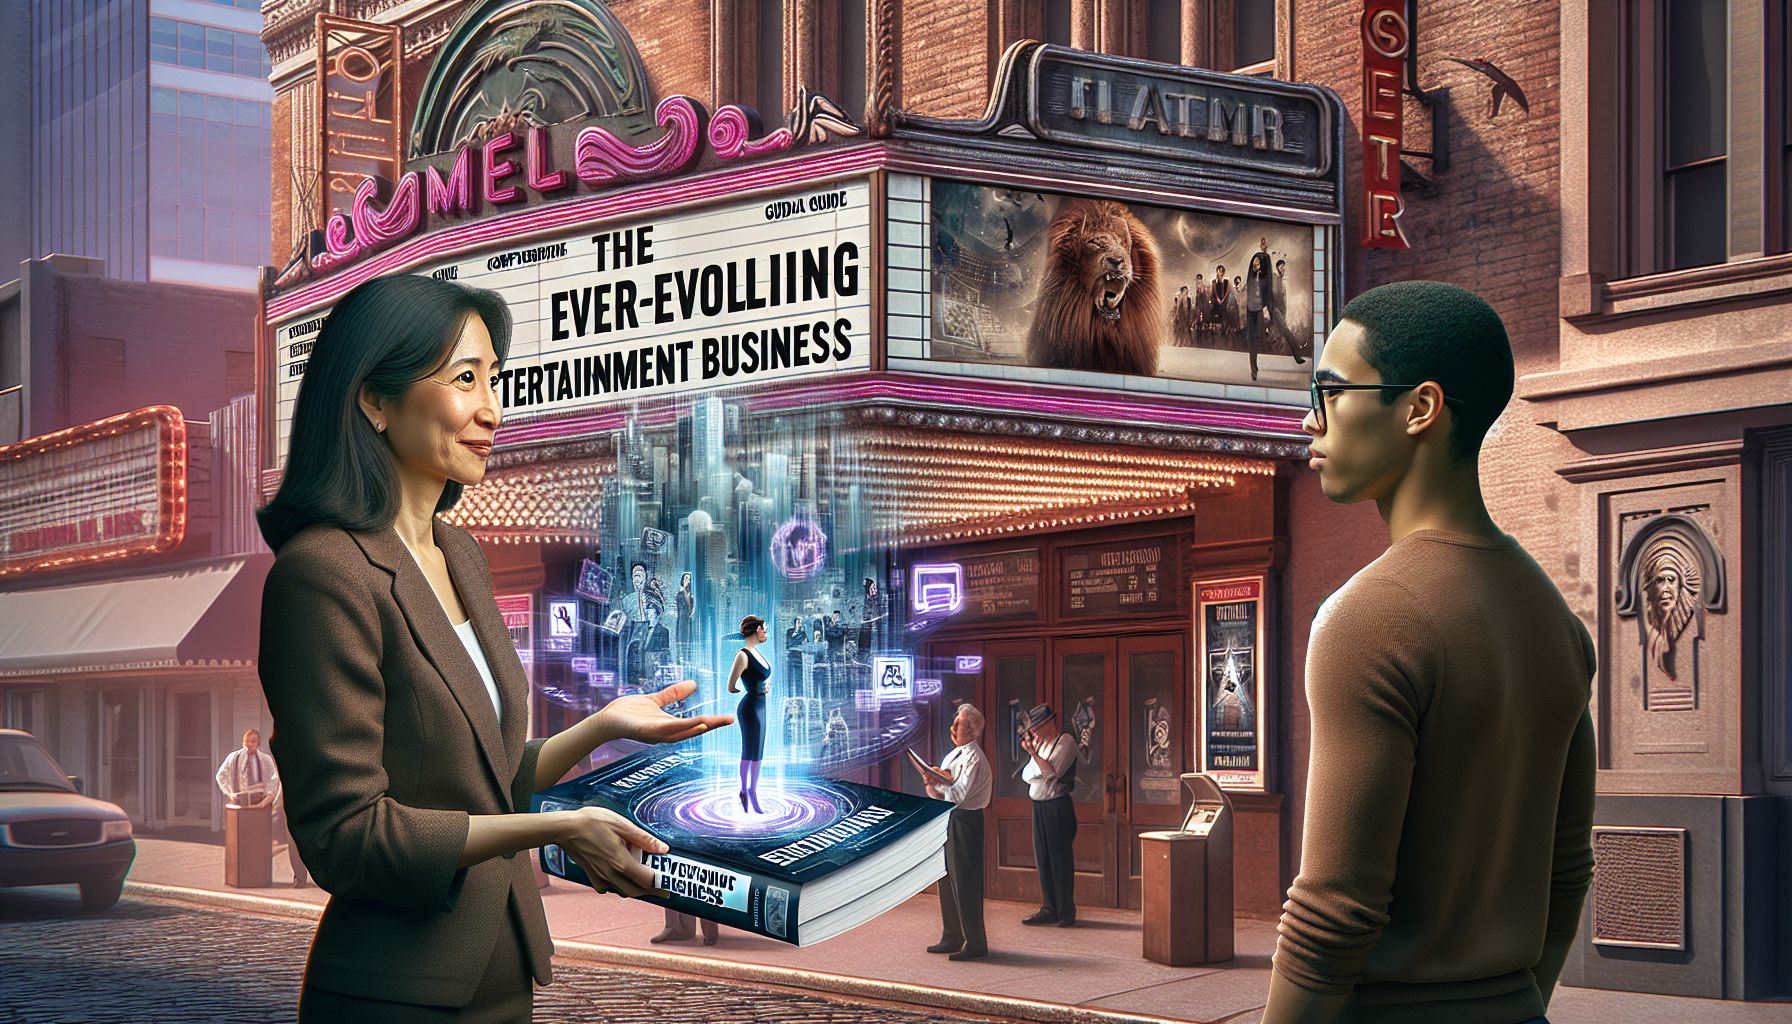 The Ever-Evolving Entertainment Business: A Theatre Owner’s and Visitor’s Guide